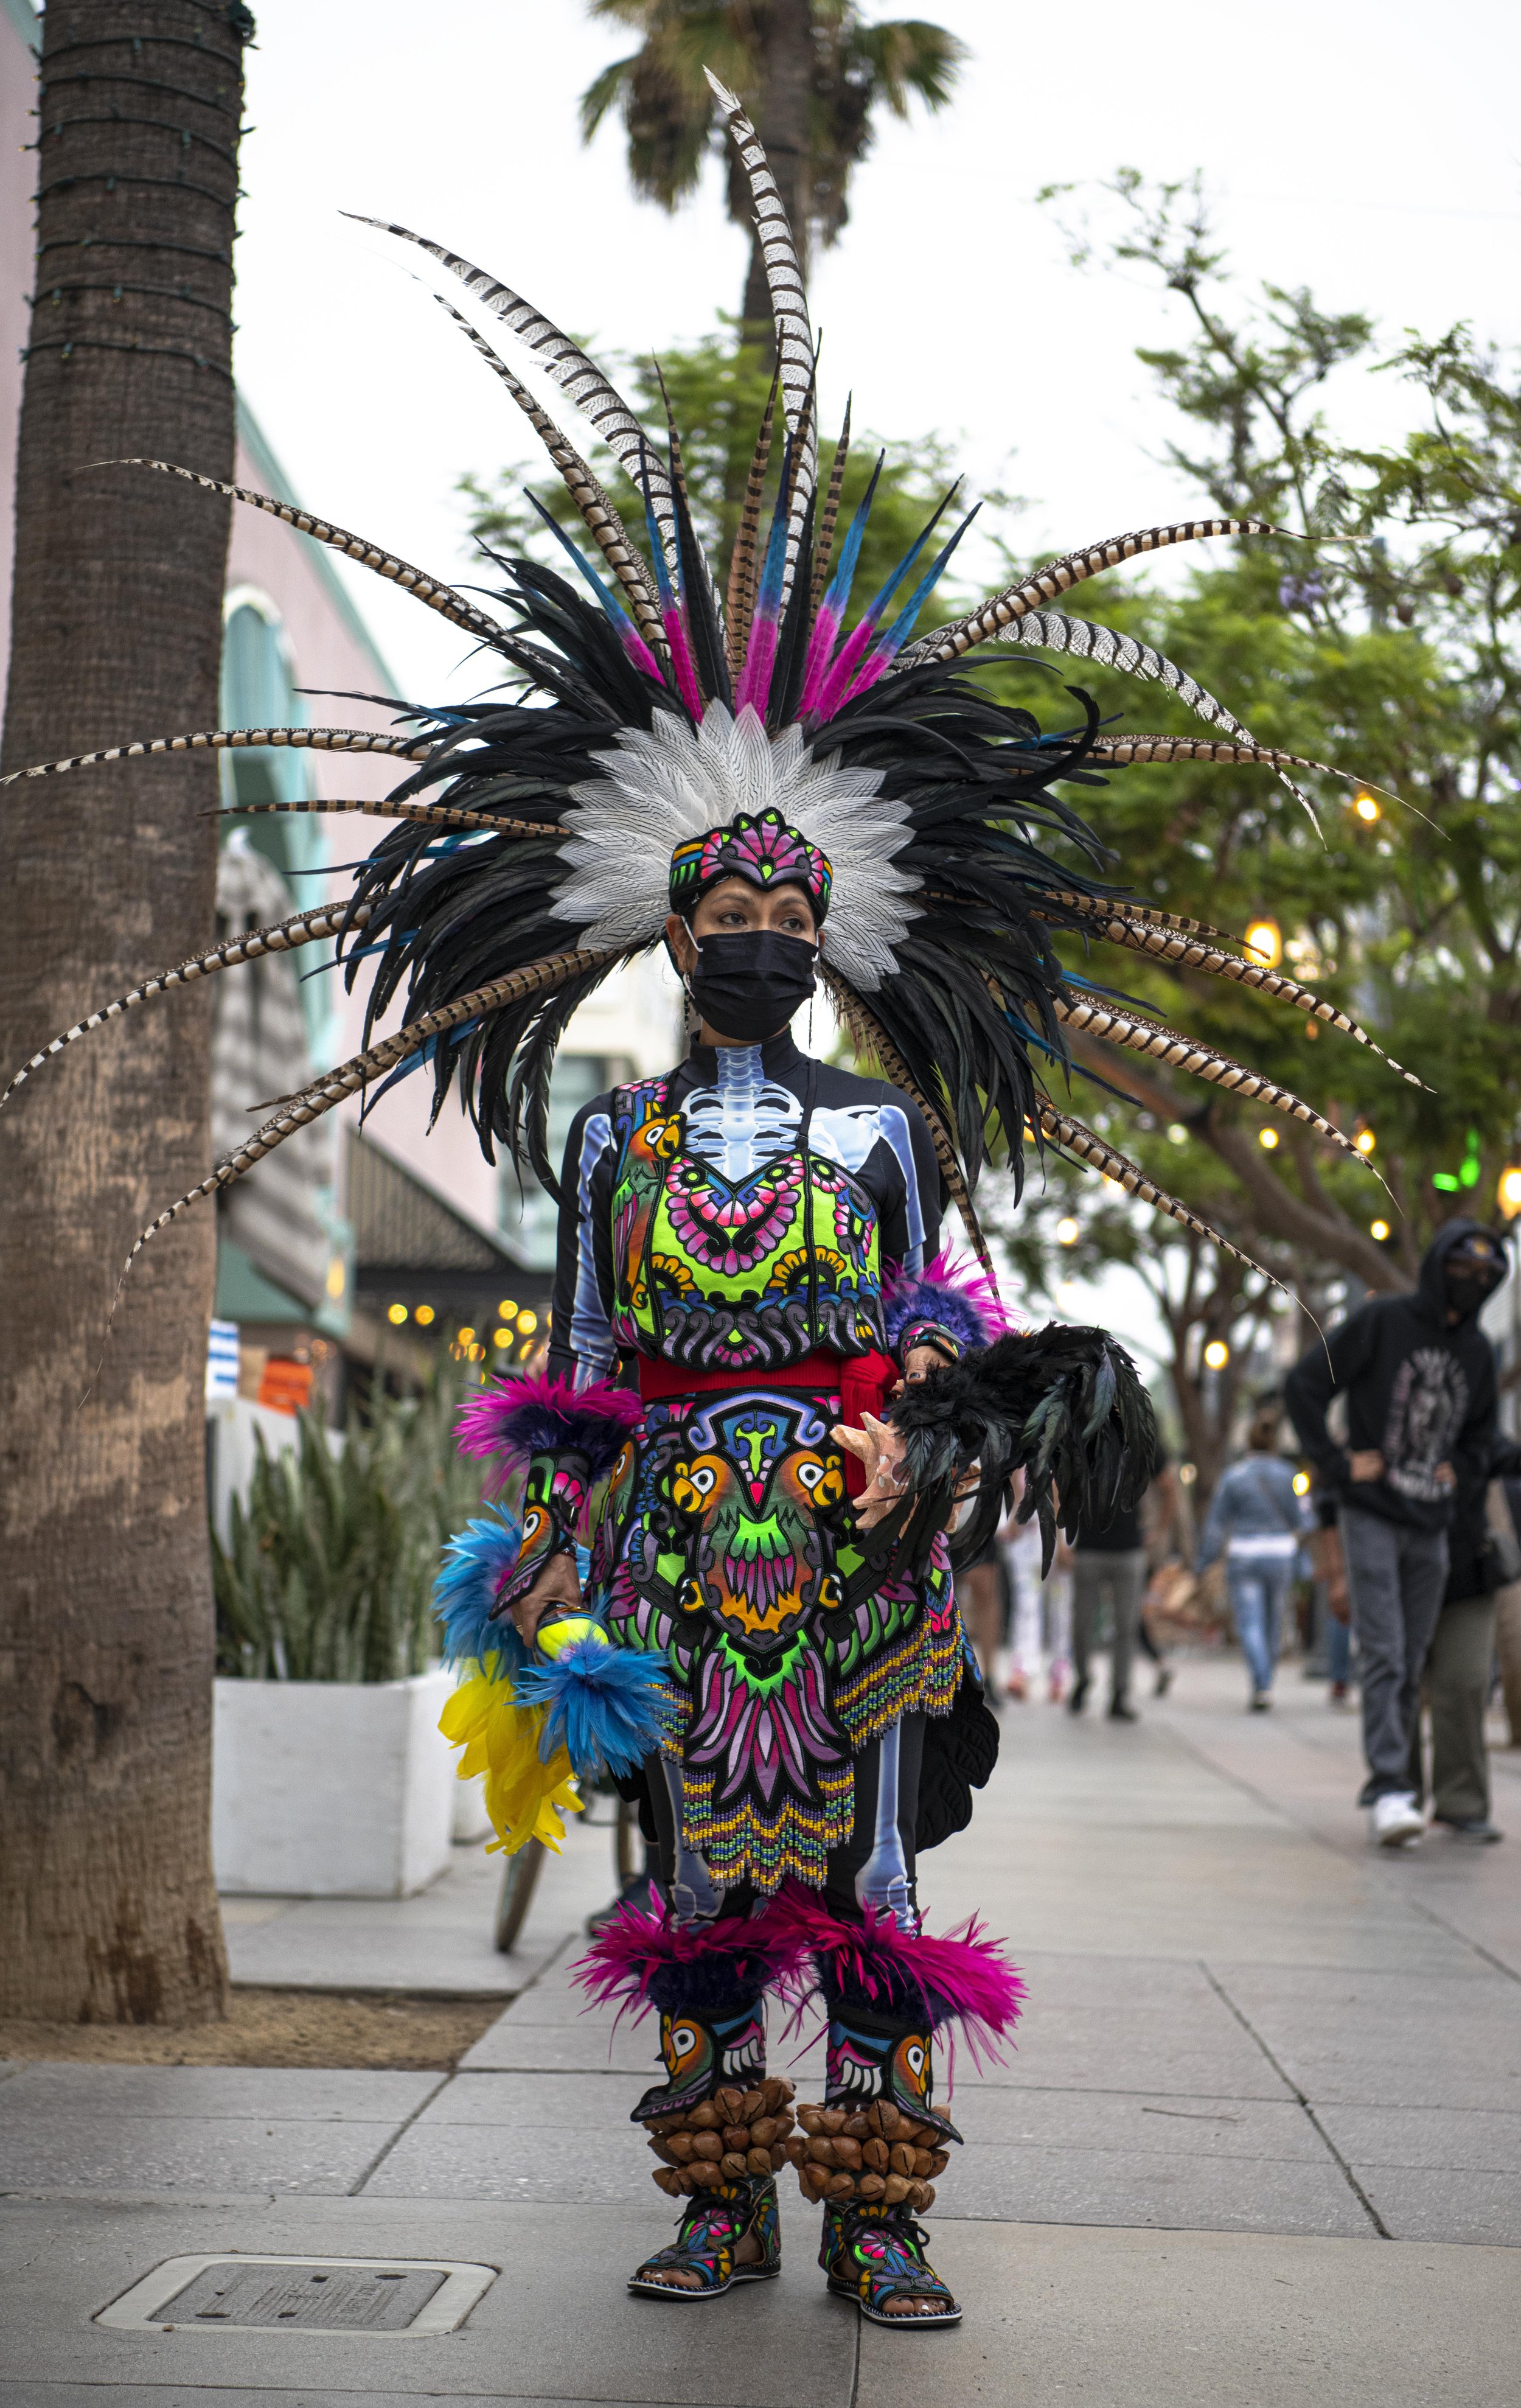  A Dia delos Muertos (Day of the Dead) performer readys herself before her event at the Day of The Dead celebration being held at the Third Street Promenade located in Santa Monica, Calif. (Jon Putman | The Corsair) 